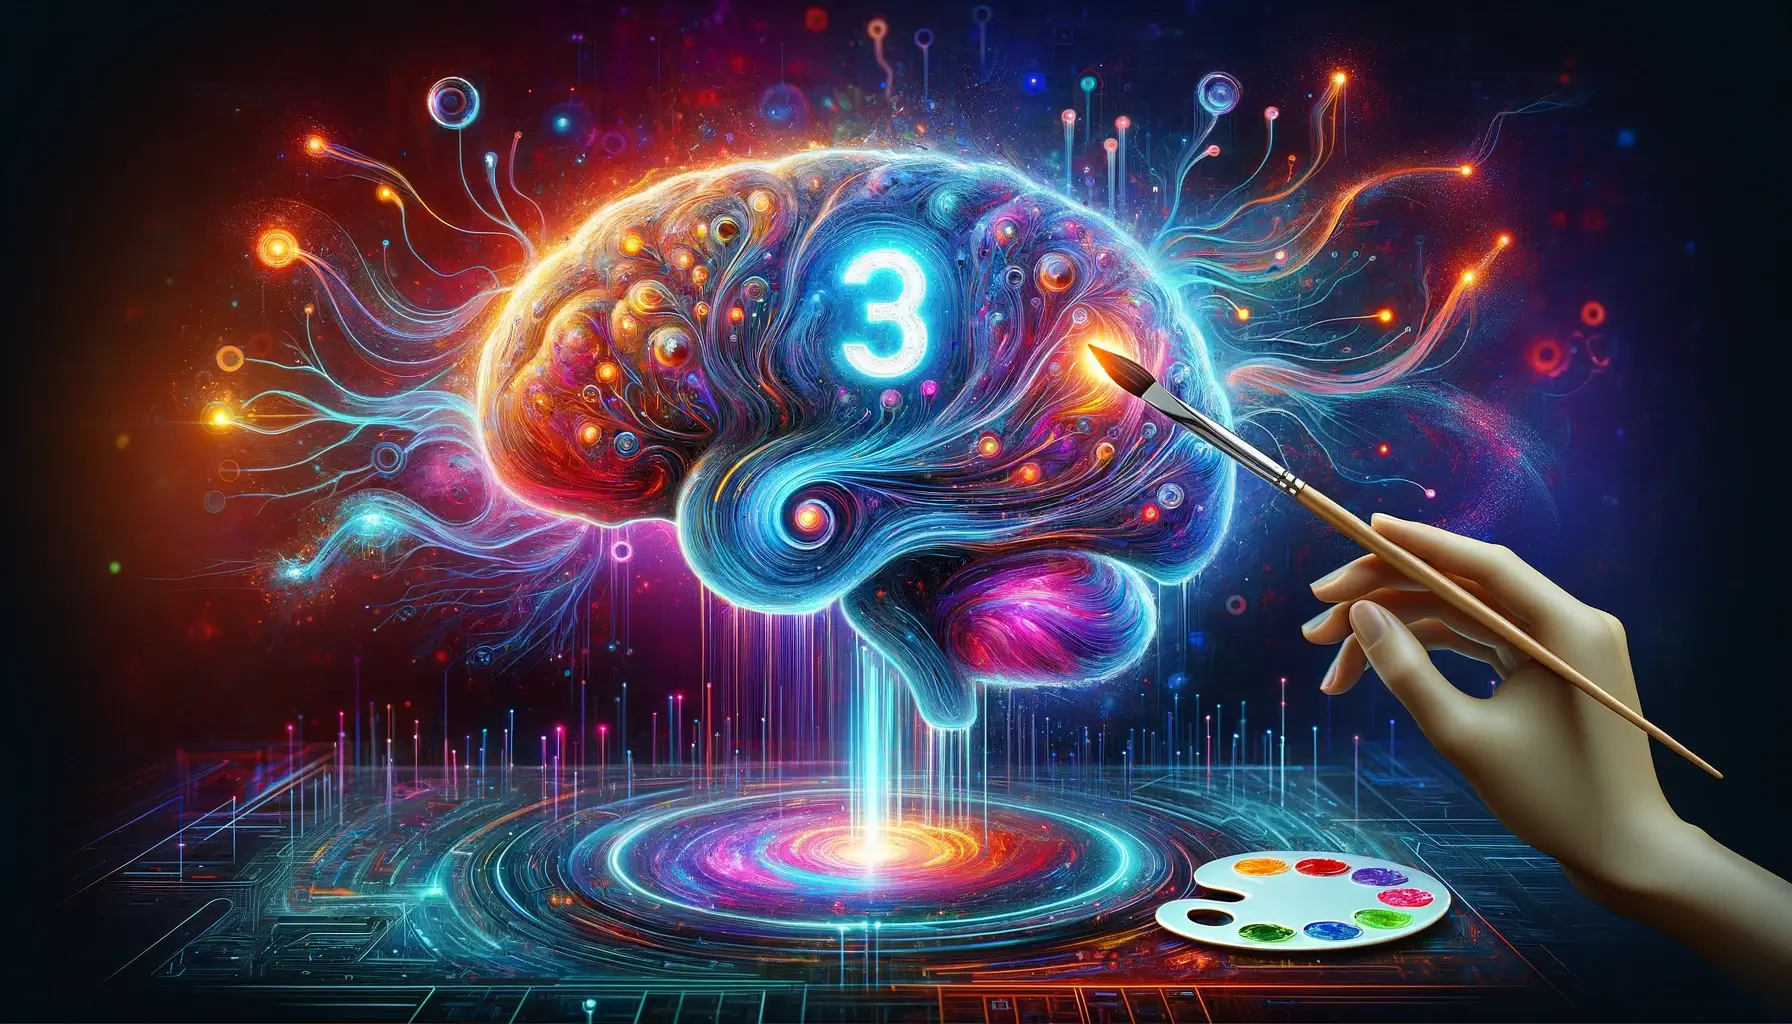 A vibrant digital art piece showcasing the concept of DALL·E 3, featuring an artistic representation of an AI brain composed of glowing neural connections and electronic circuits. The brain is engaging with traditional art tools like a palette and brush, symbolizing the fusion of technology and creativity. The image highlights the powerful, creative potential of AI in a visually compelling composition with dynamic colors and futuristic elements.